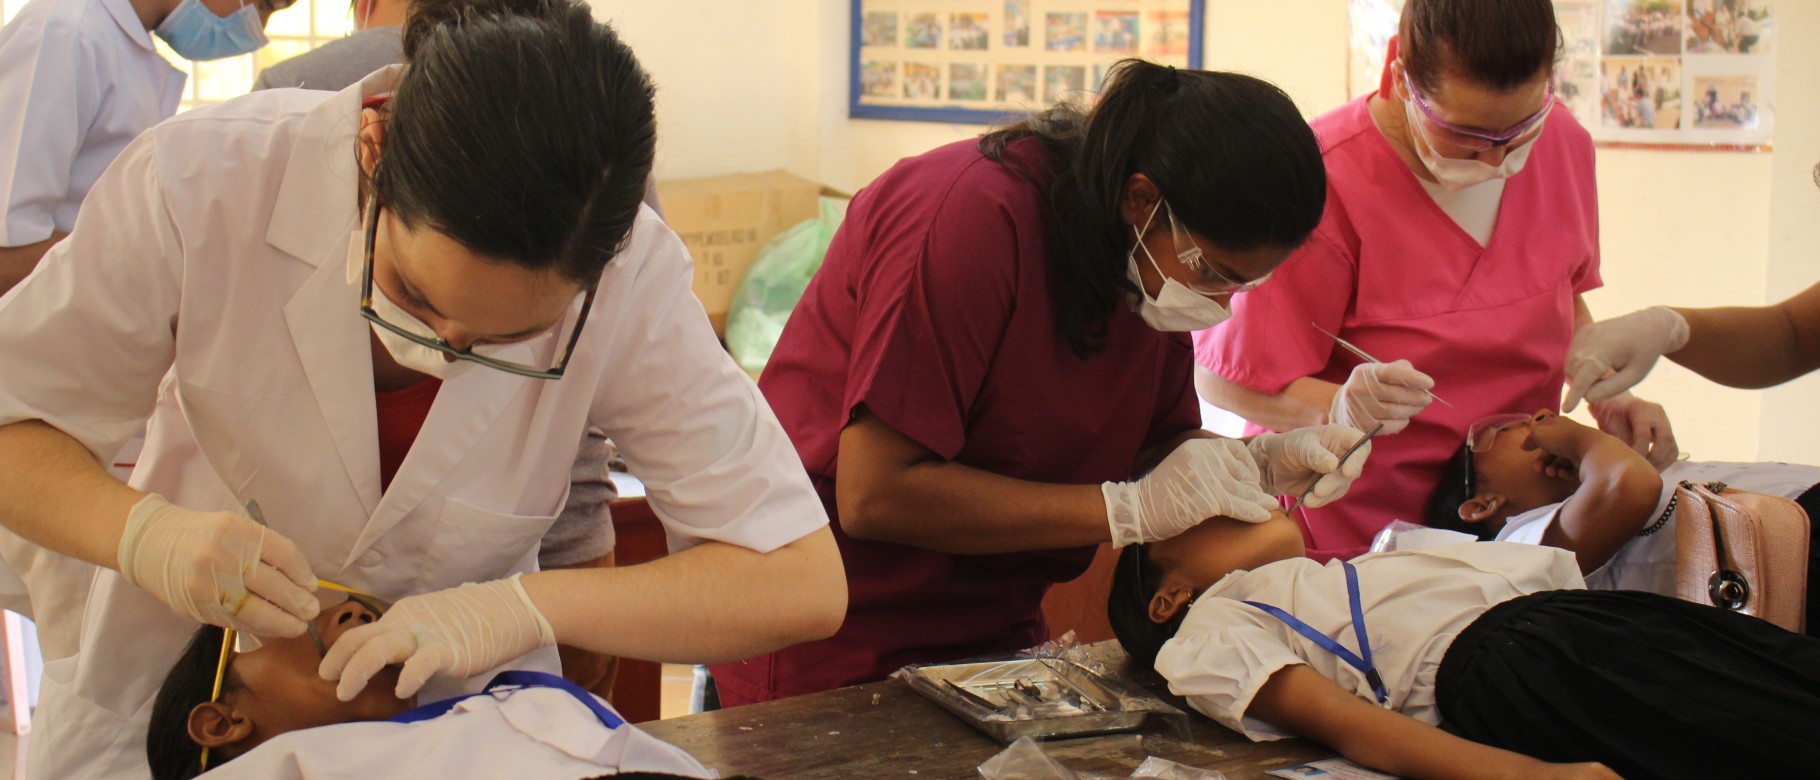 Lindsey Cunningham, Tara Prasad and Nicole Kimmes provide care to children in a primary school in Phnom Penh